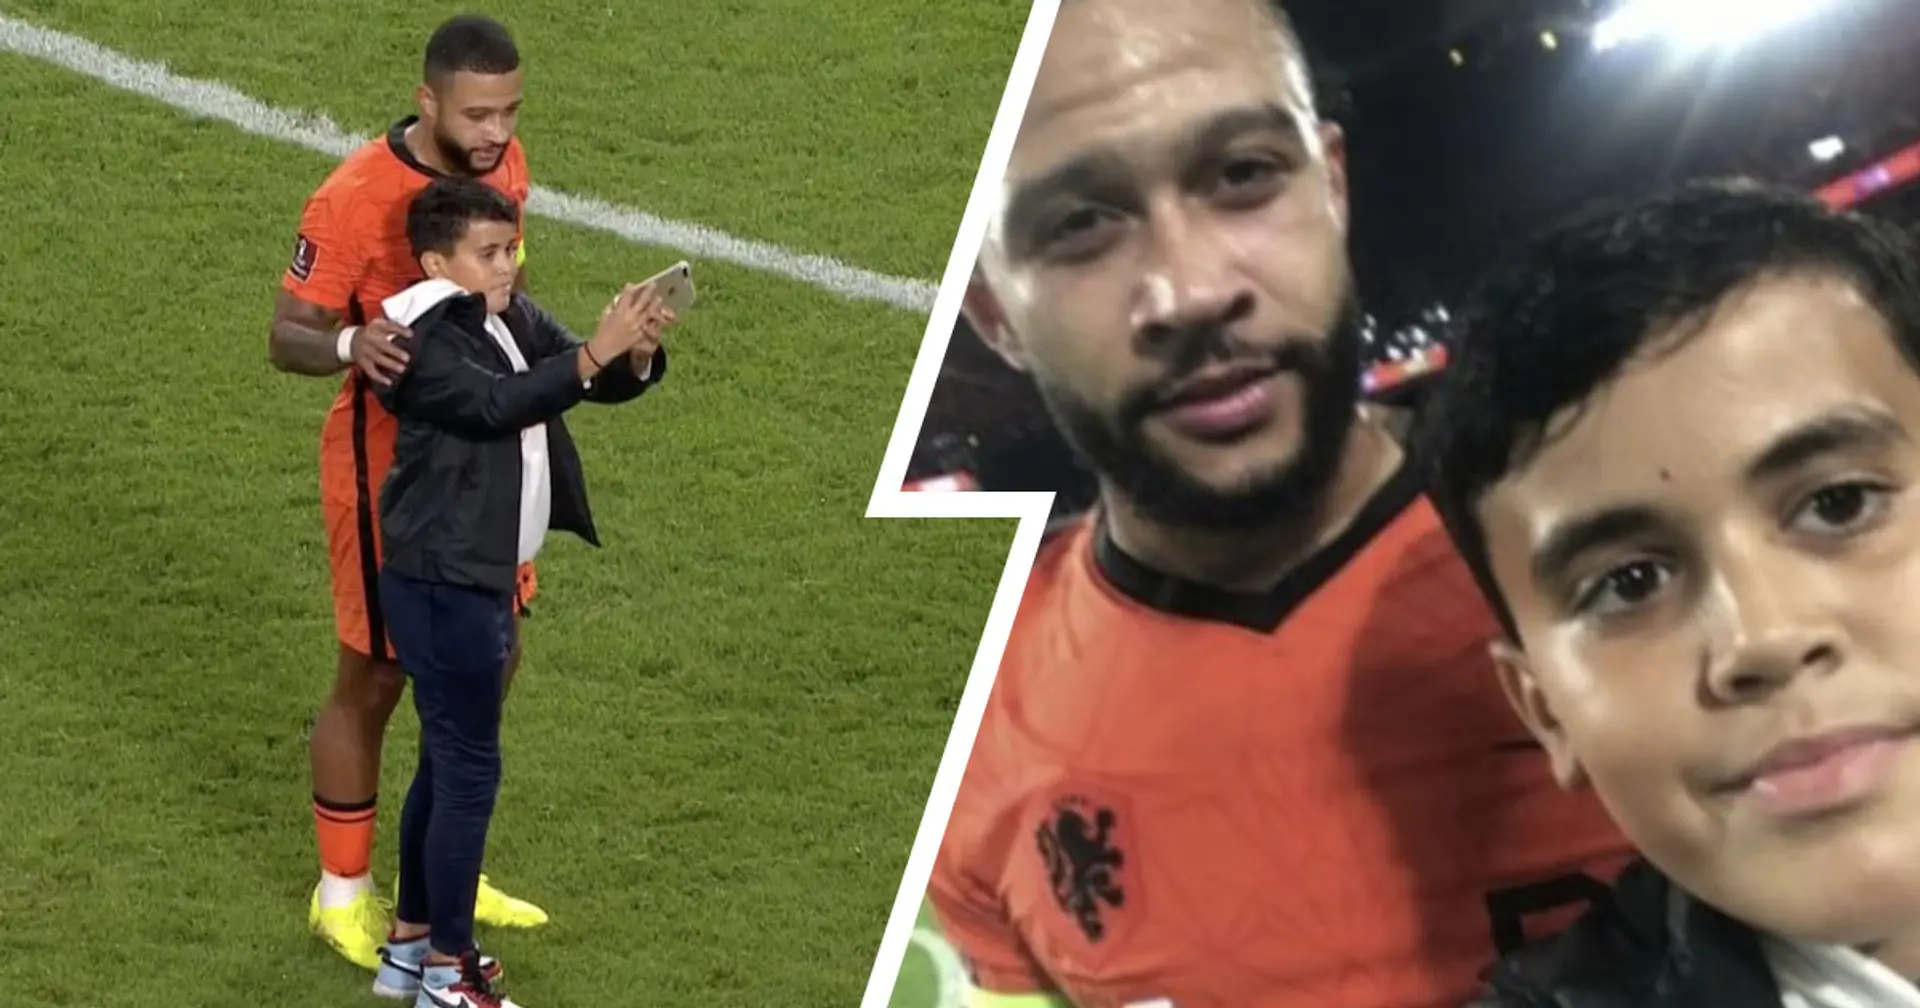 Little kid who took selfie with Depay hit with 45-month stadium ban and €100 fine